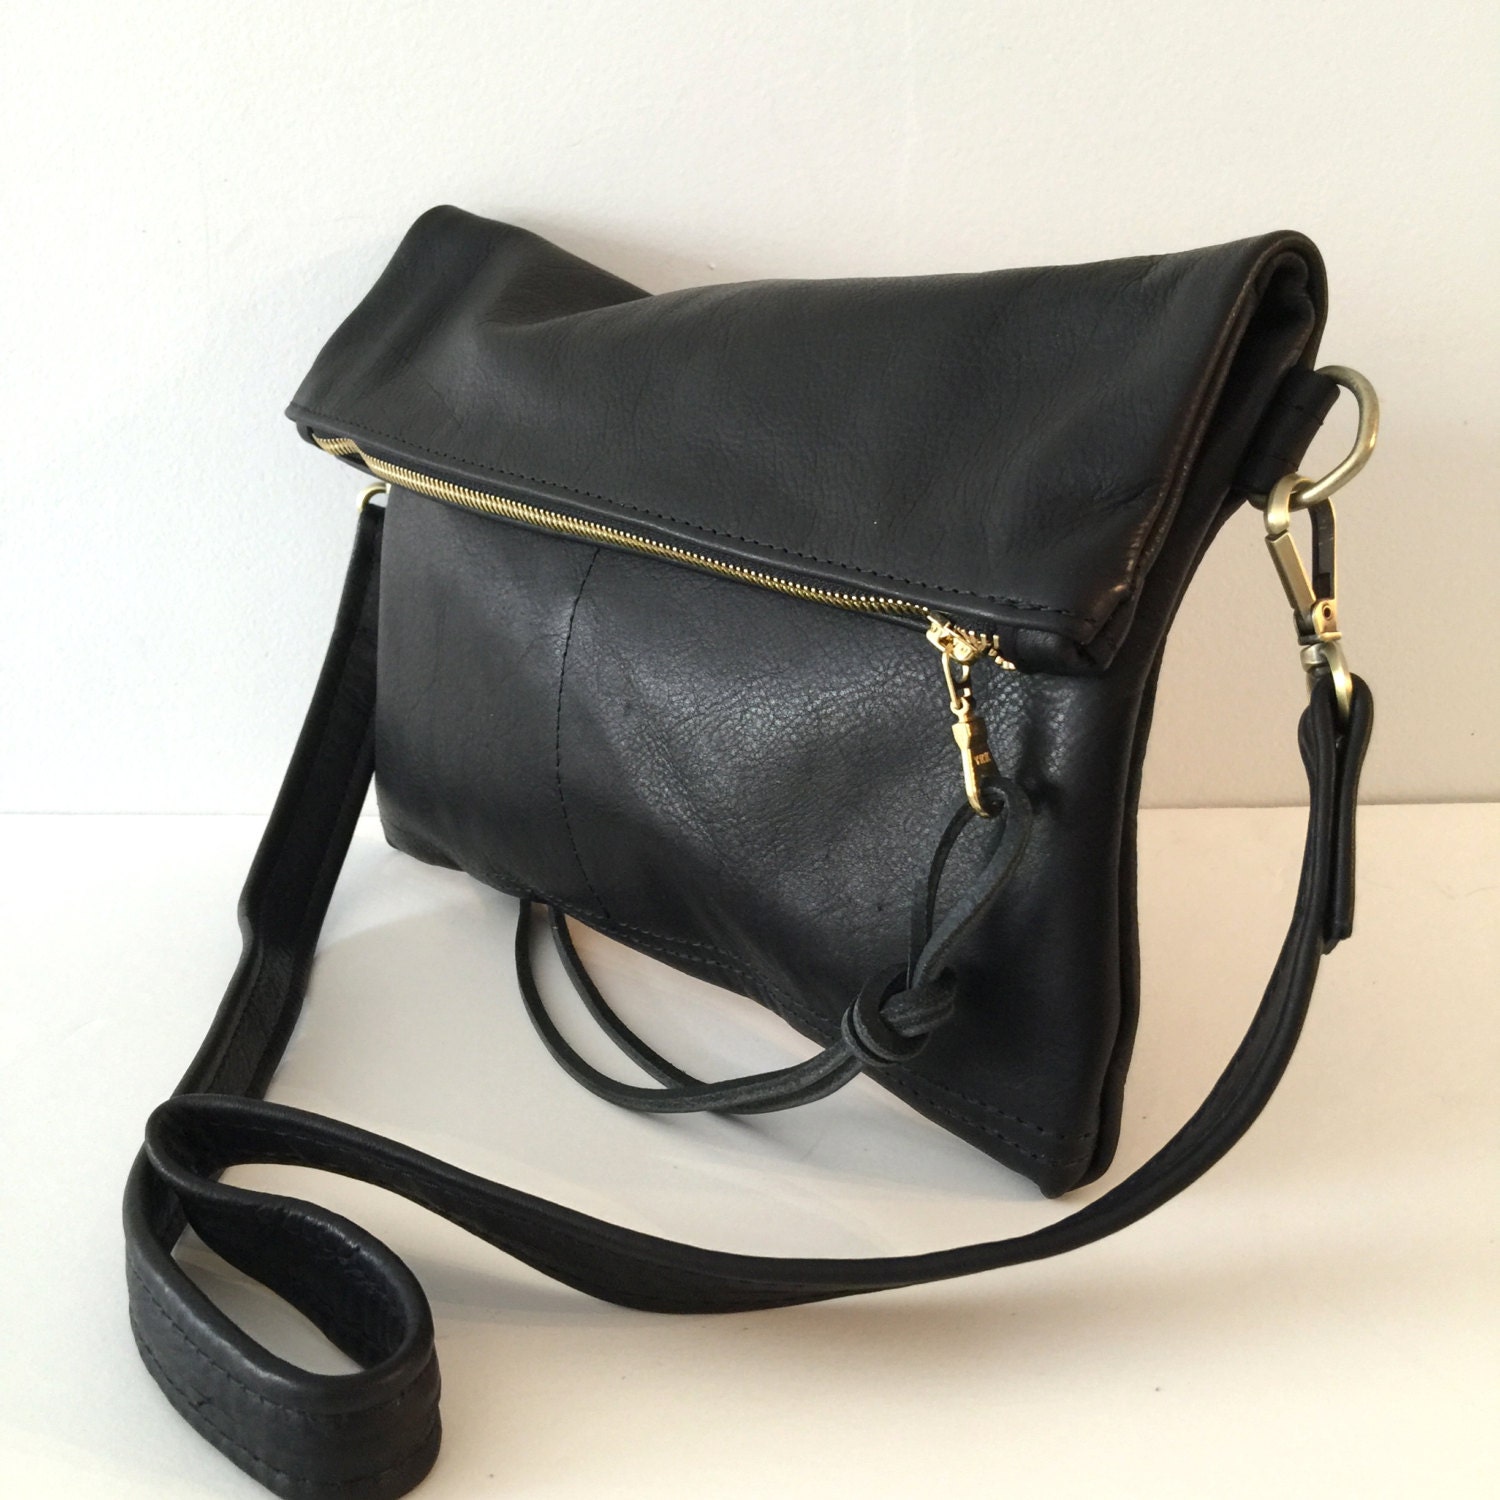 Black Leather Clutch Large Fold over Clutch cross body bag